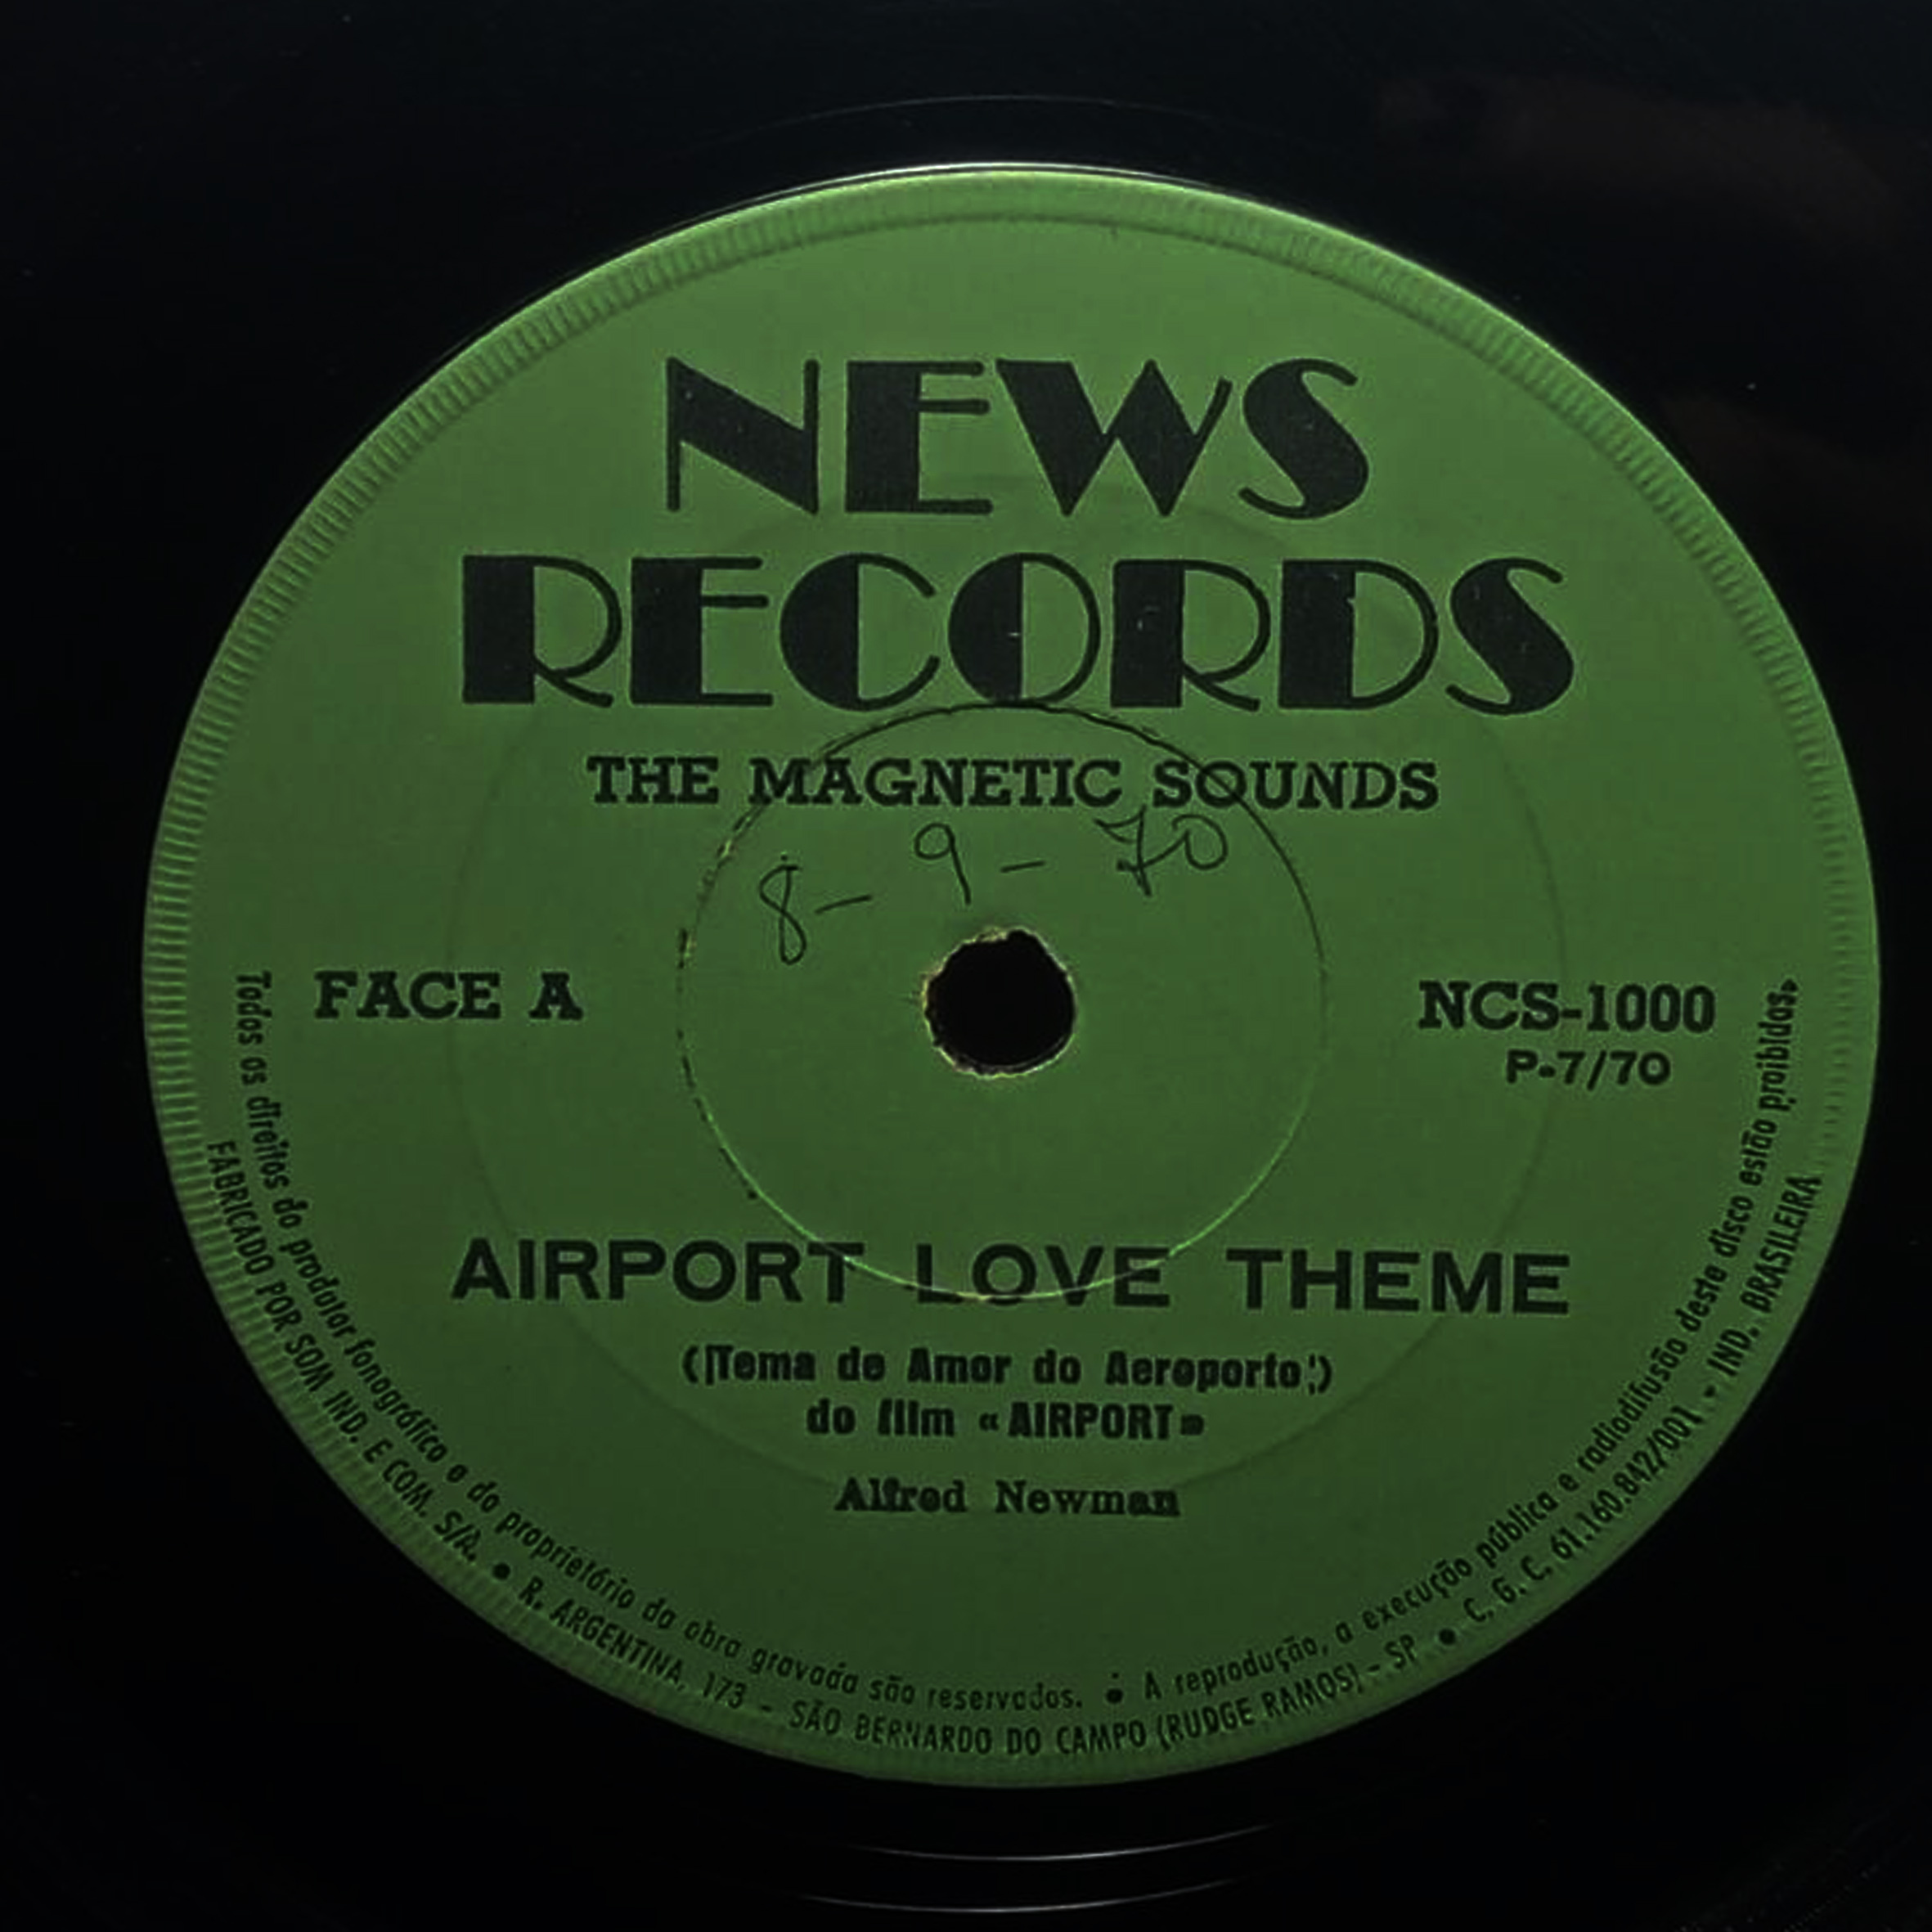 Vinil Compacto - Magnetic Sounds The - Airport Love Theme